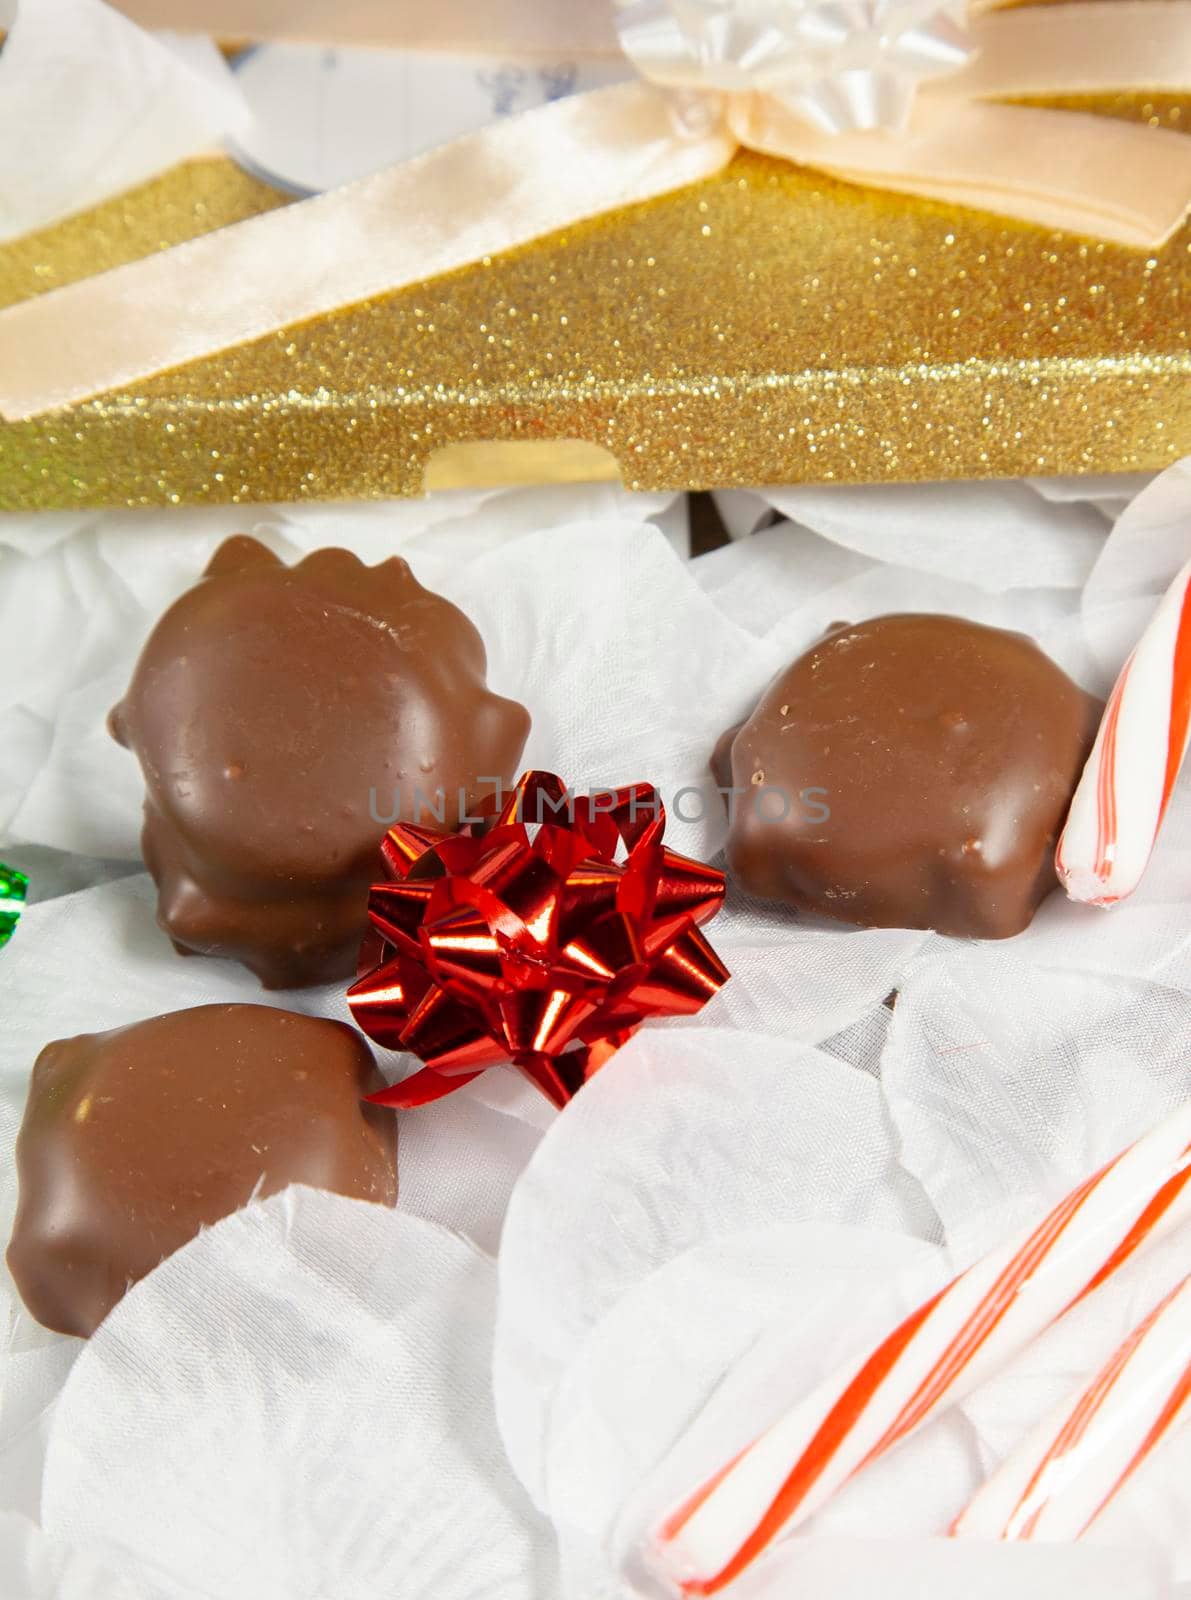 Three caramel and pecan chocolates on white petals with green and red bows, candy canes, and a gold gift package